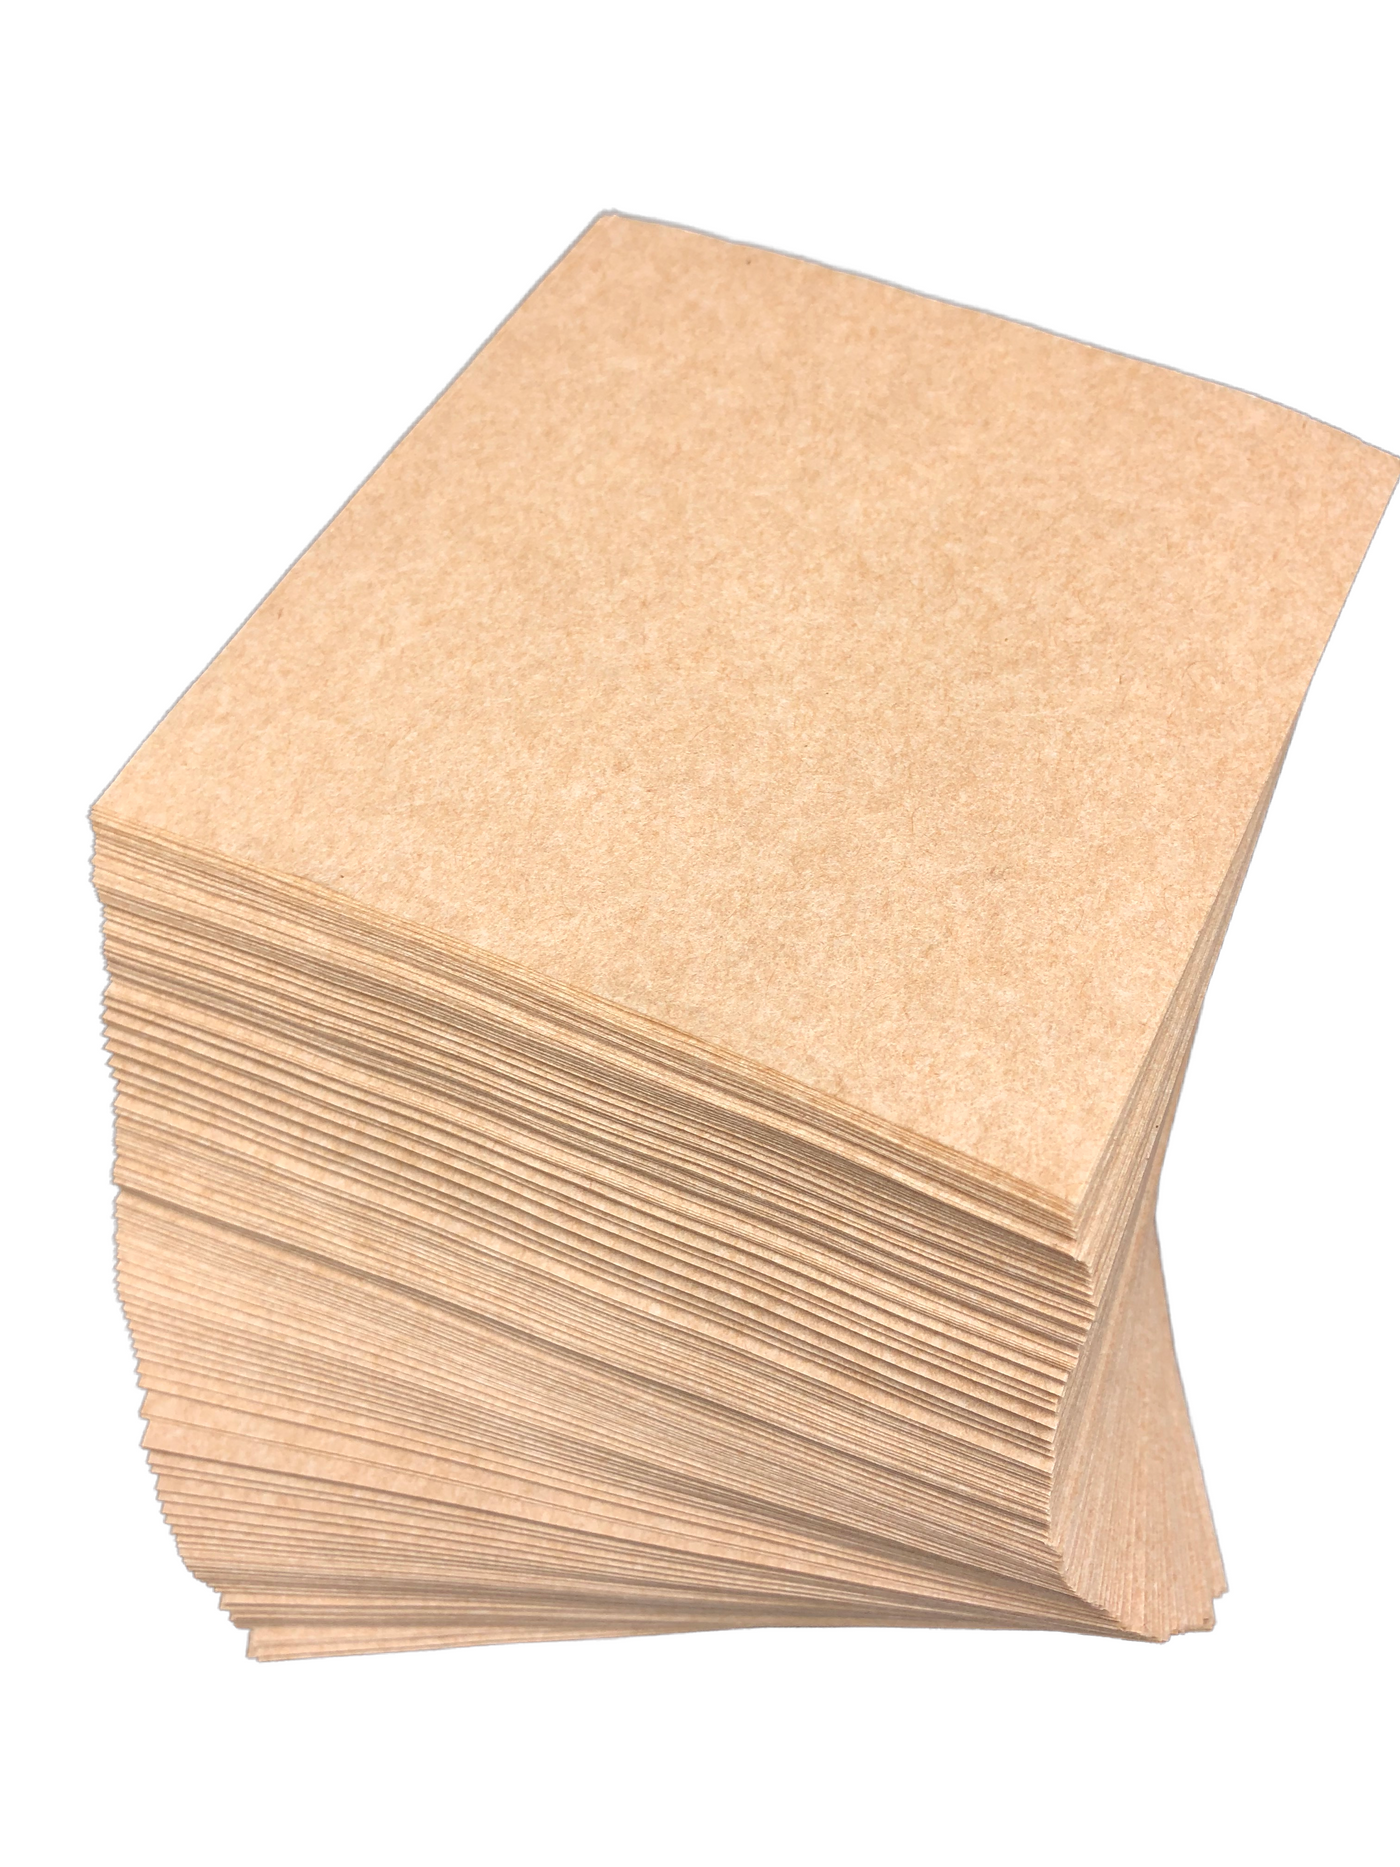 Parchment Paper Sheets For Baking: Oven Safe Parchment Paper, Parchment  Sheets, Bakery Quality Baking Paper For Perfect Results, High Temperature,  Co - Imported Products from USA - iBhejo